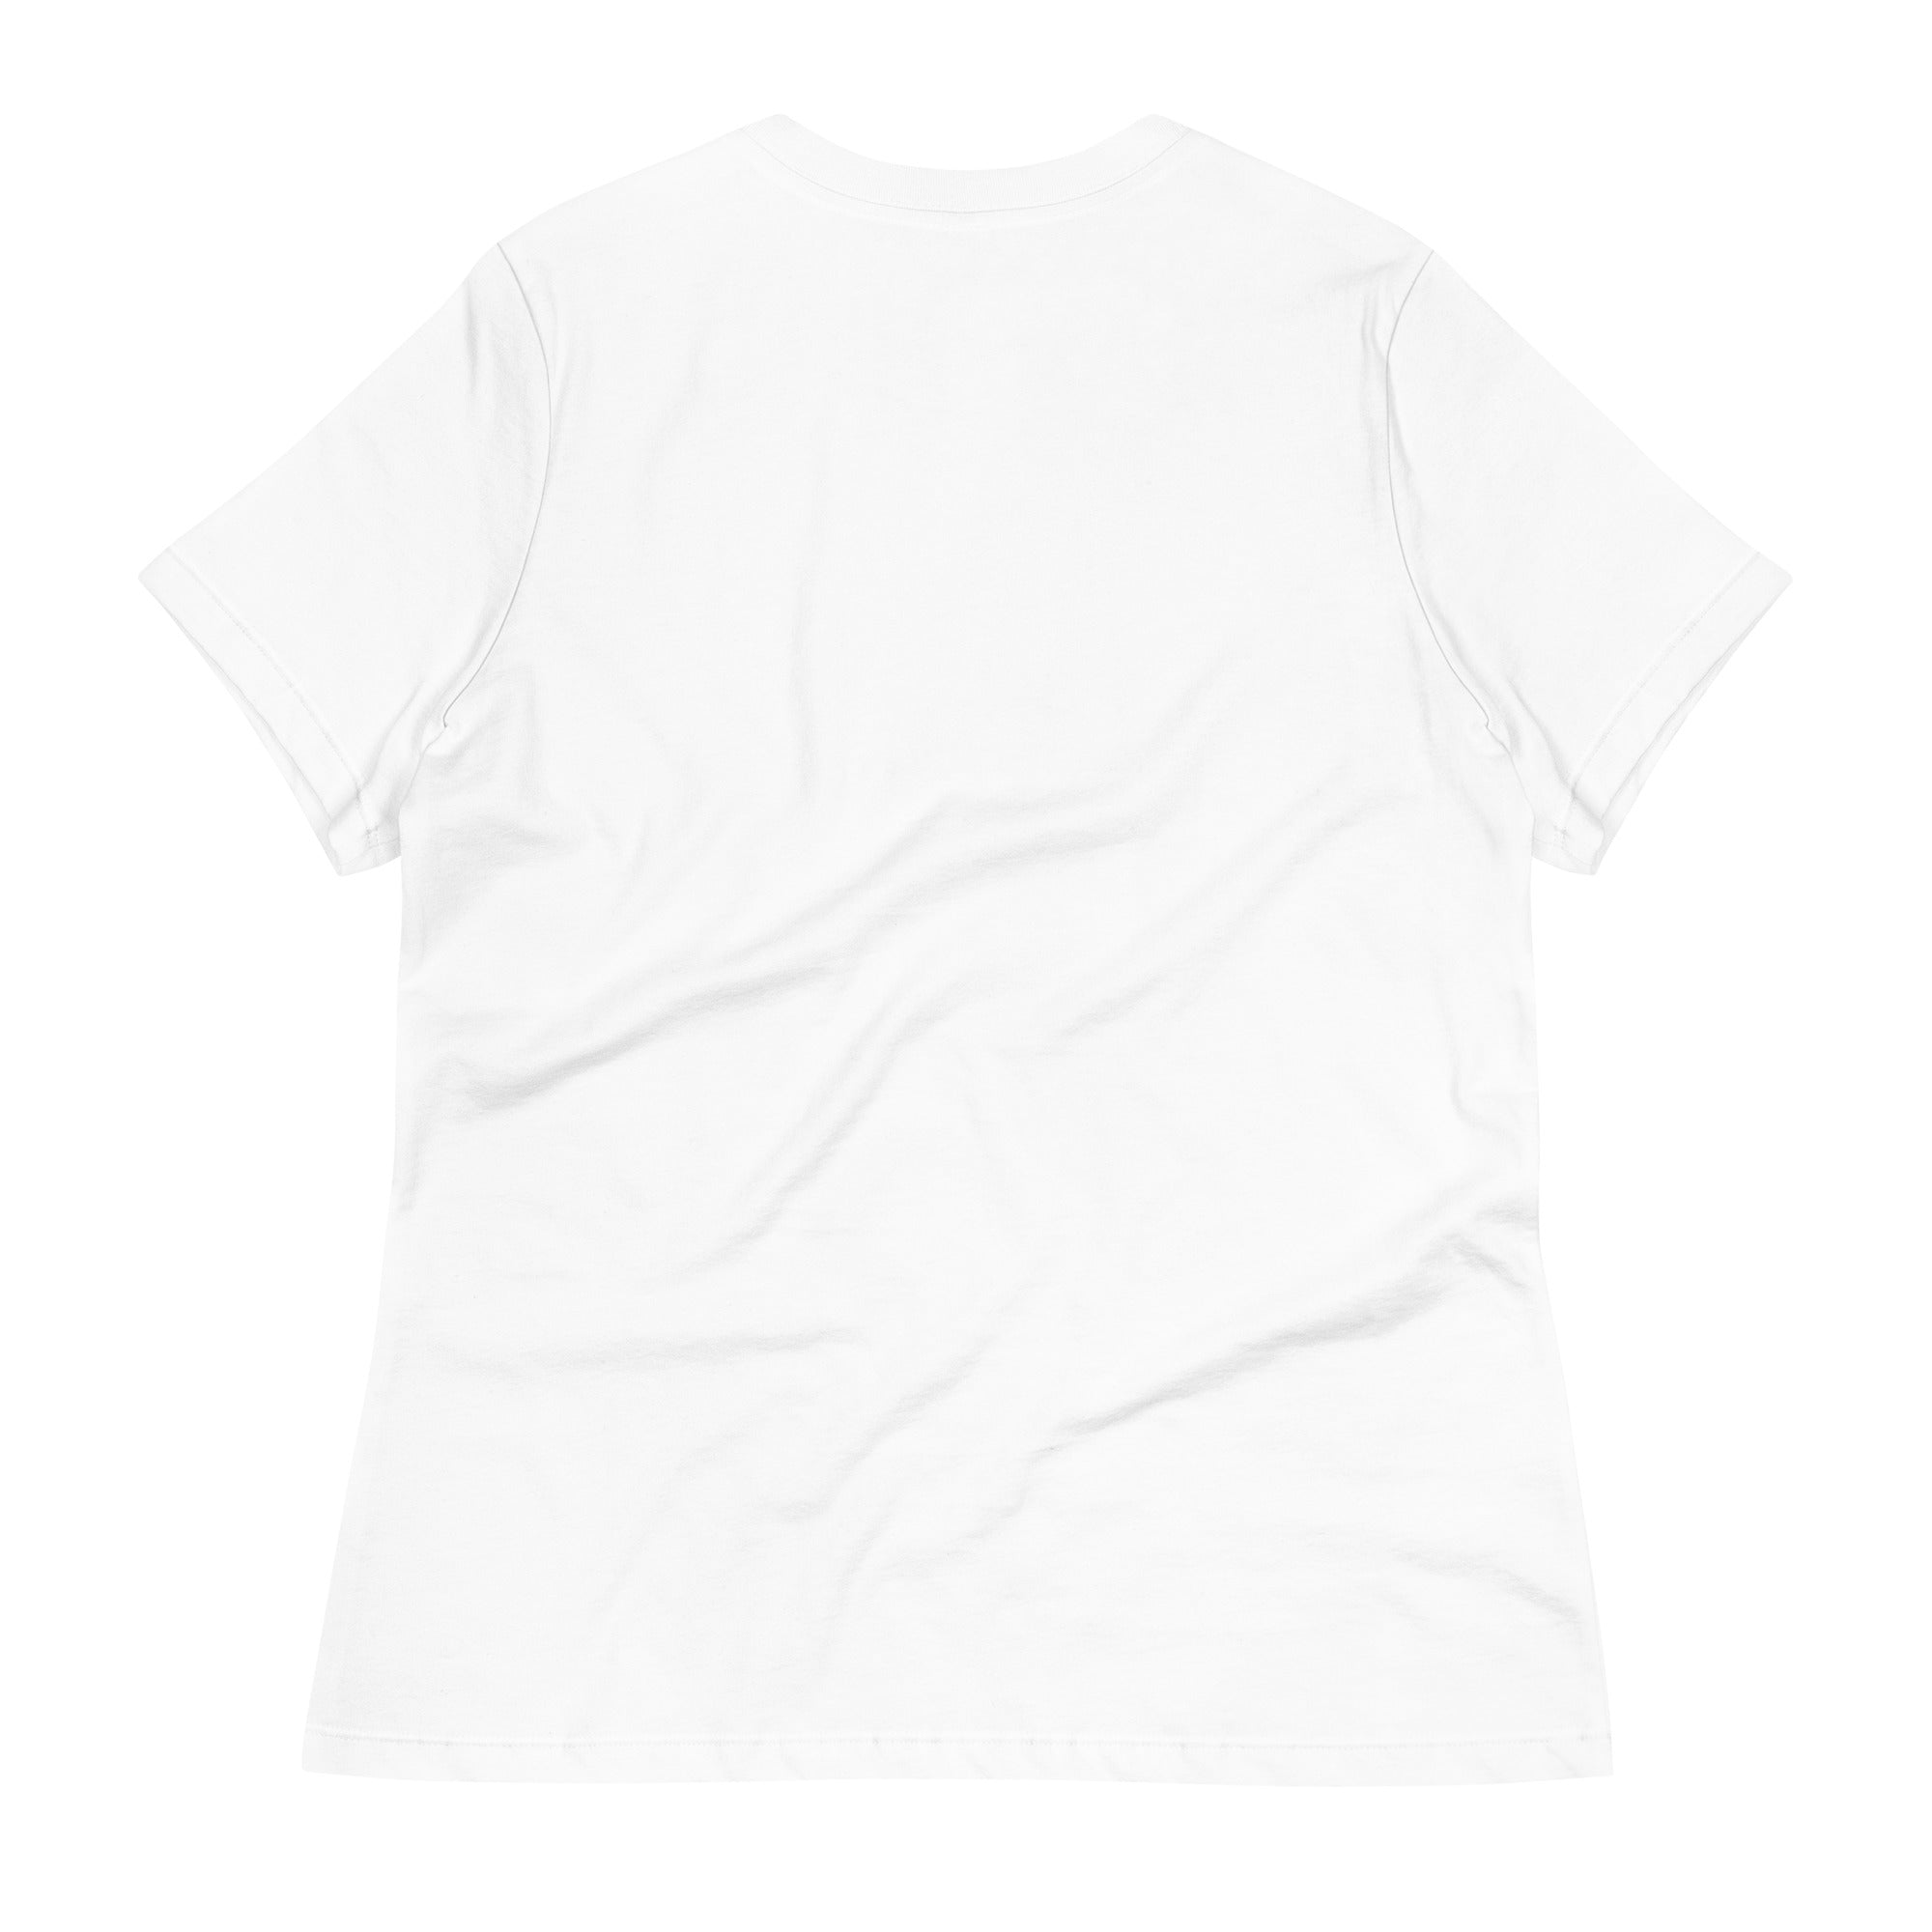 Clishirt© Embroidered White Fish Women's Relaxed T-Shirt